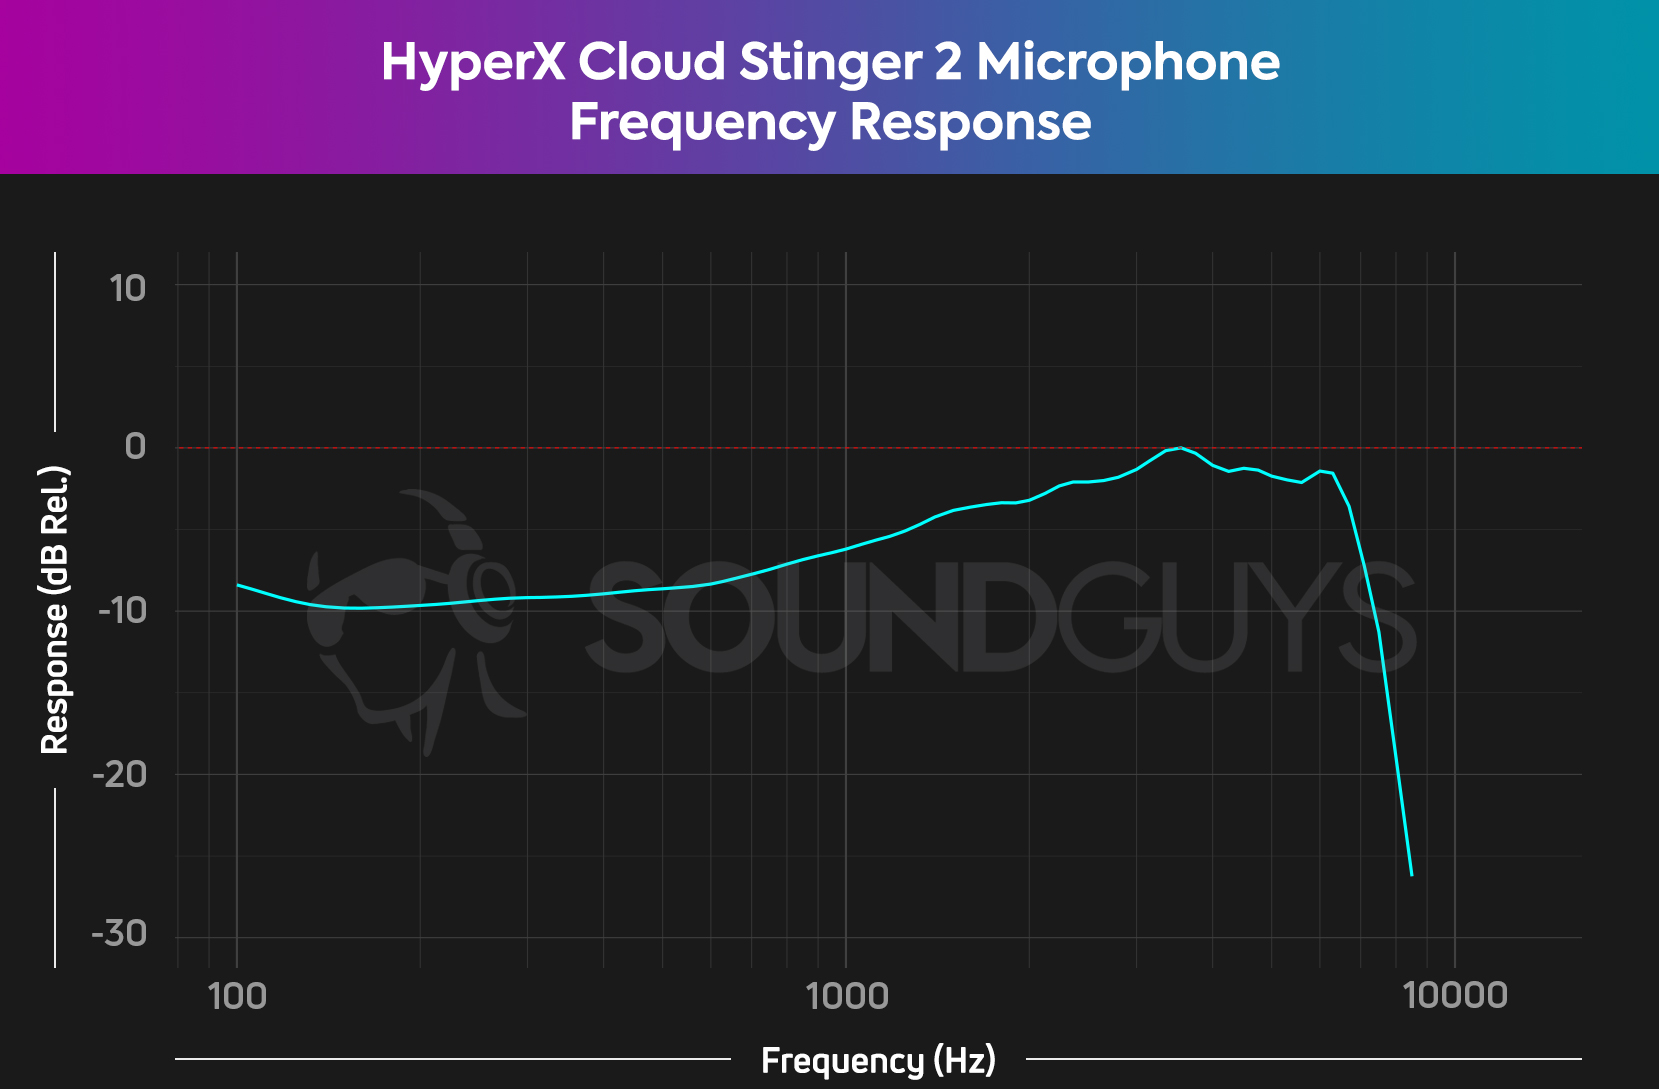 The HyperX Cloud Stinger 2 microphone frequency response curve, showing a slow increase up to around 8 KHz and then a sharp drop off.